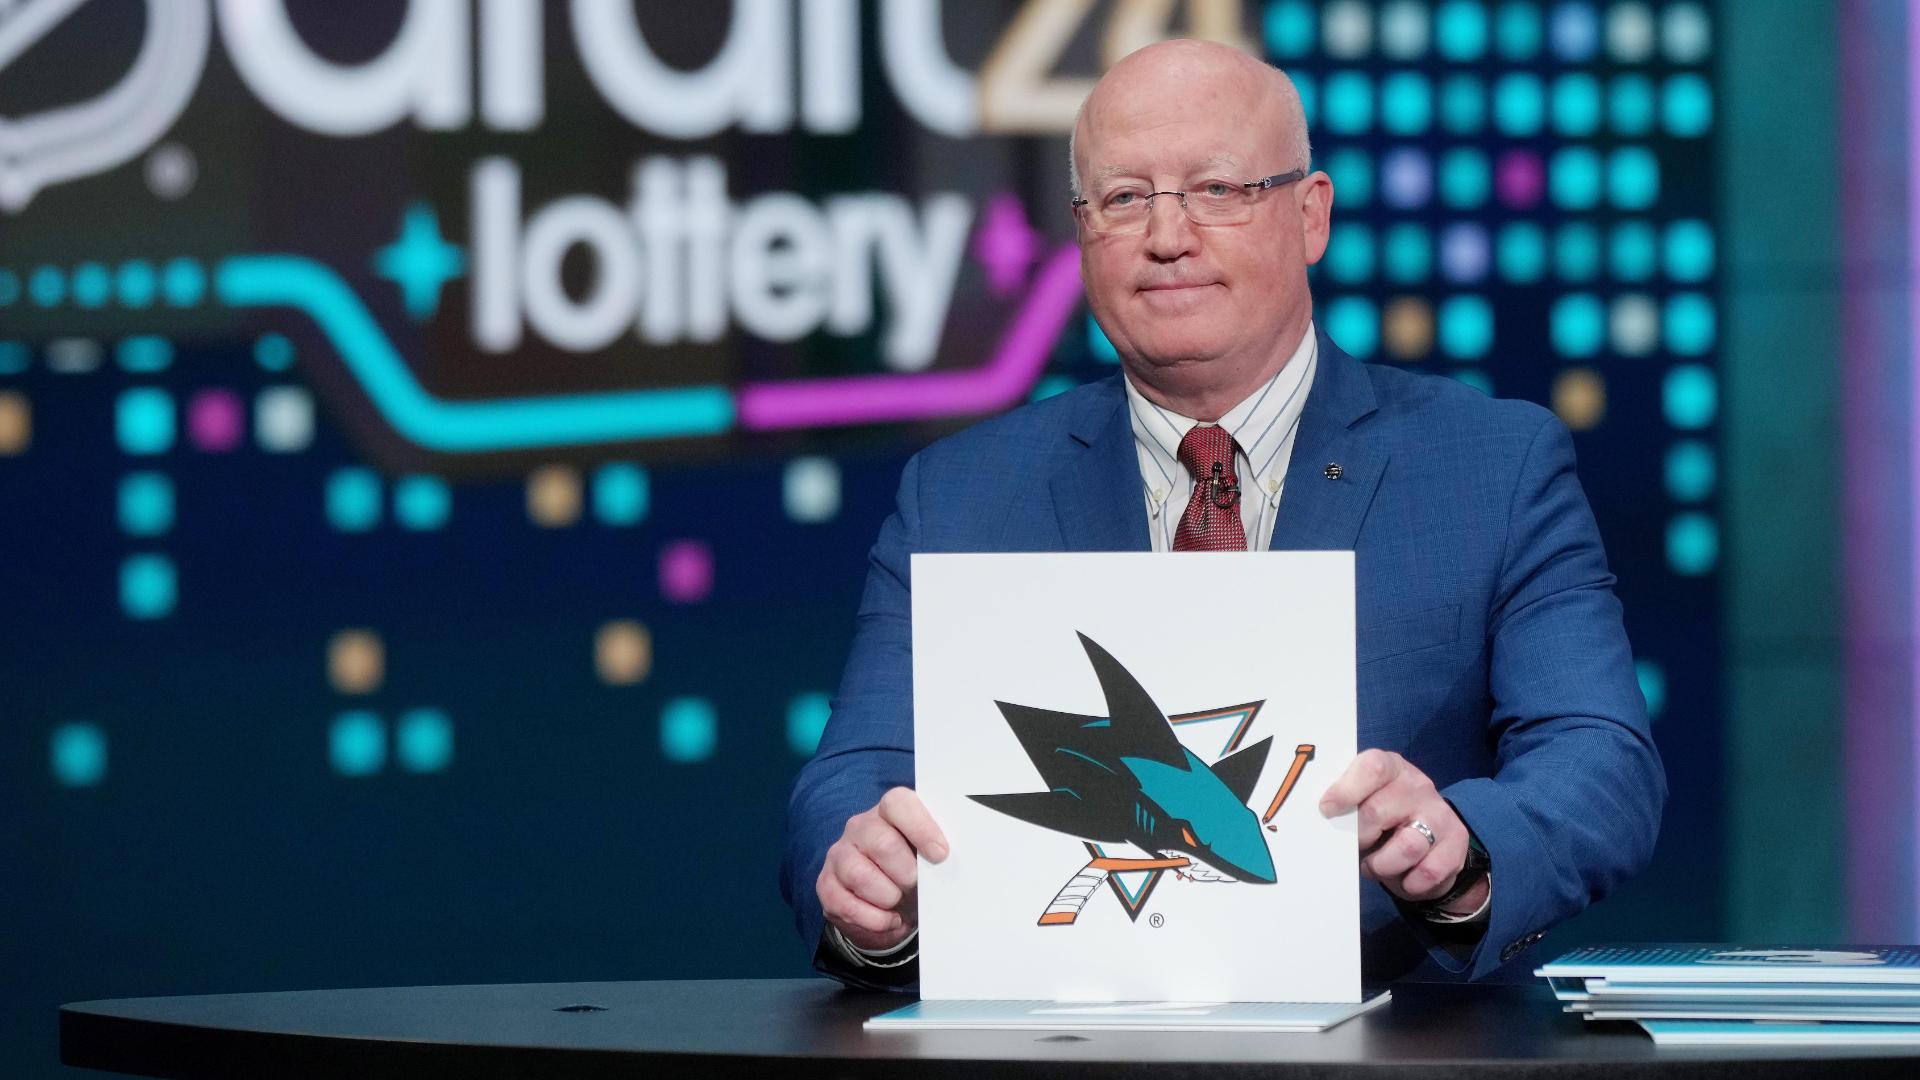 Sharks win NHL draft lottery to receive No. 1 overall pick